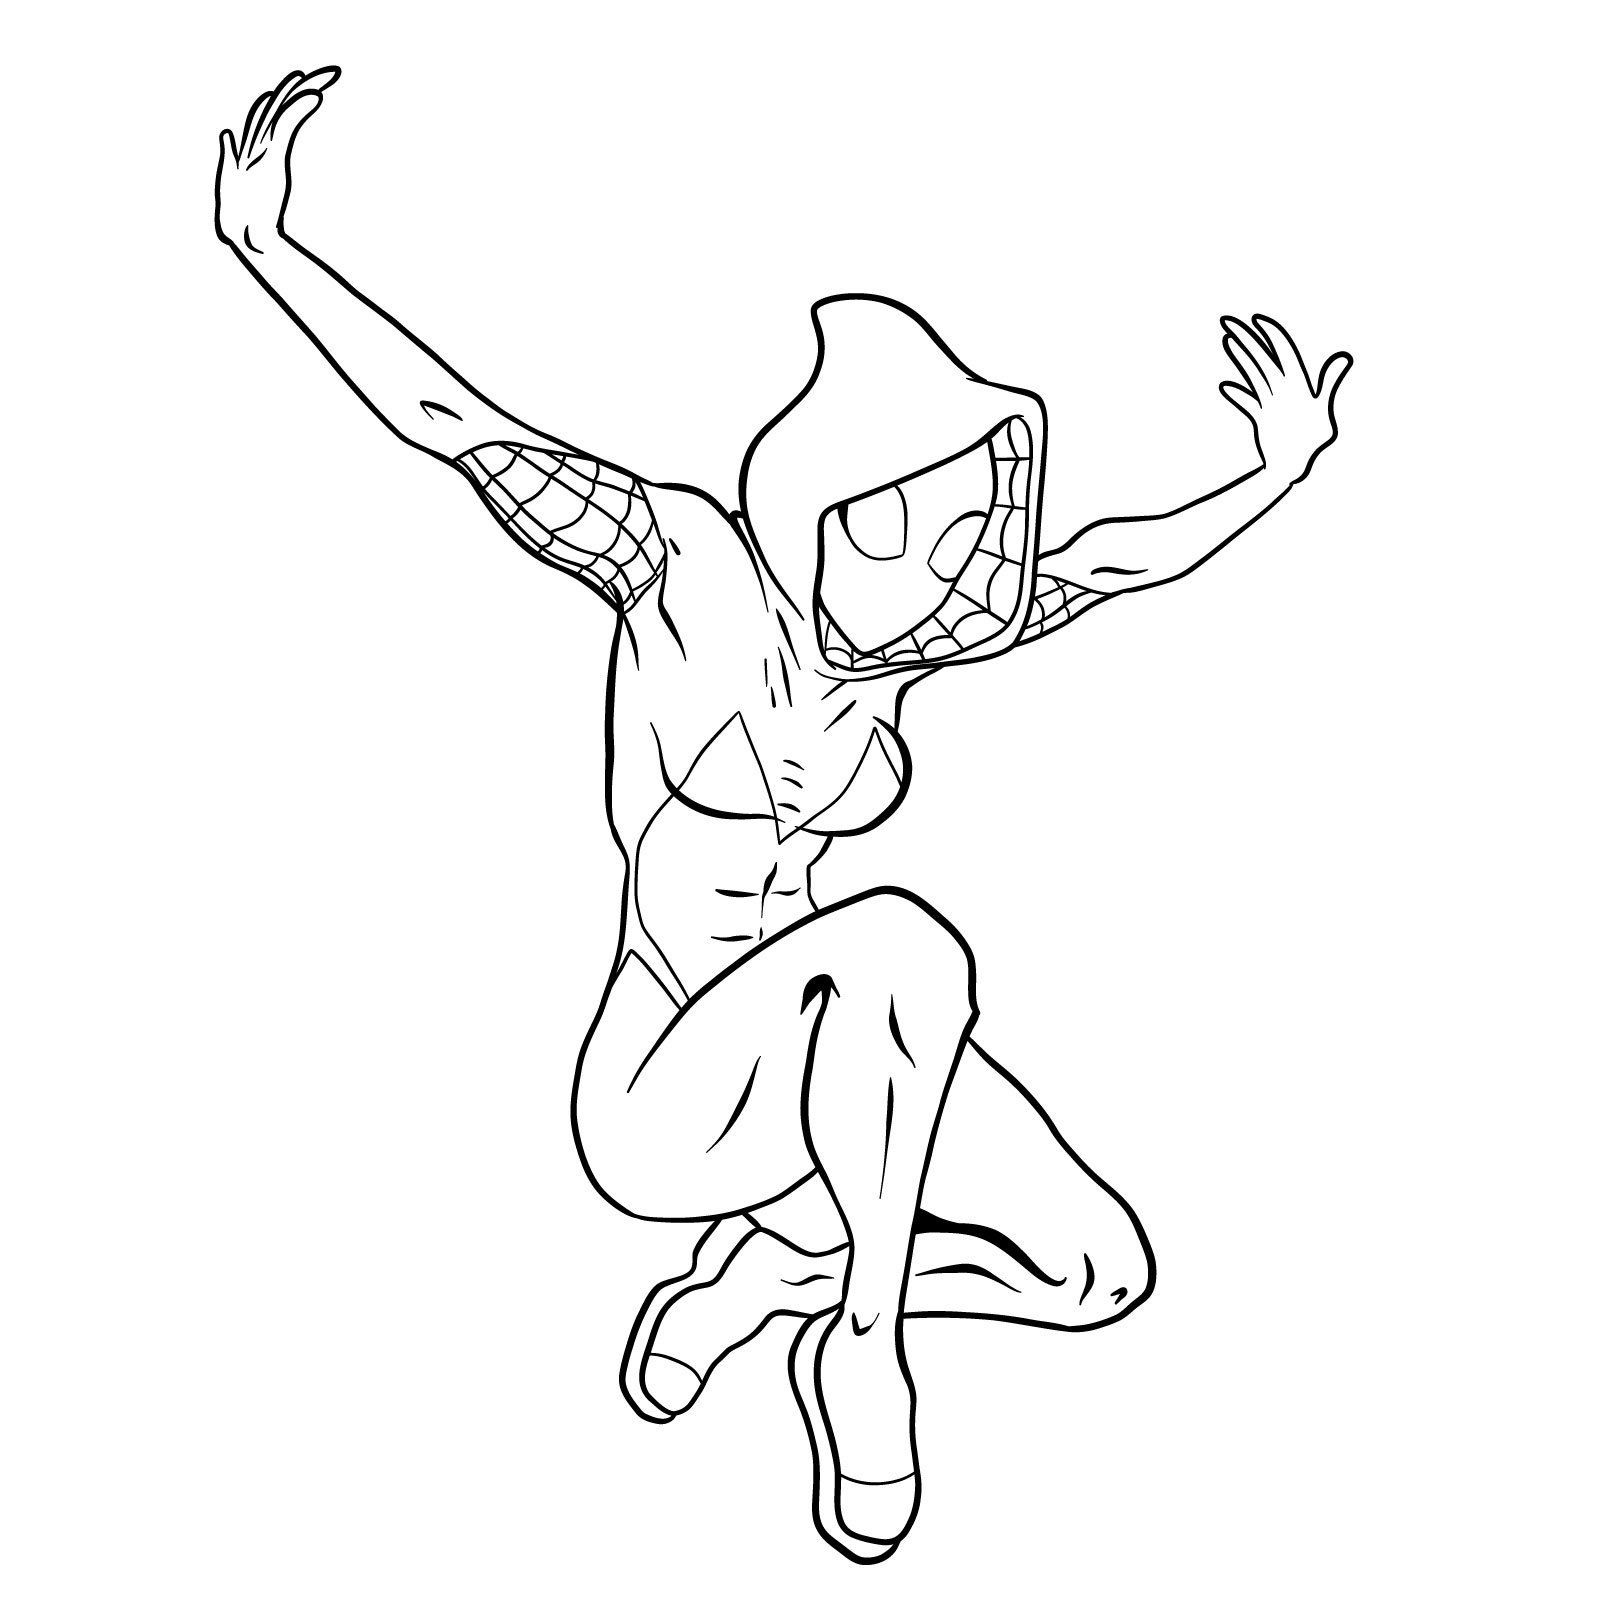 How to draw Spider-Gwen in a jump - final step